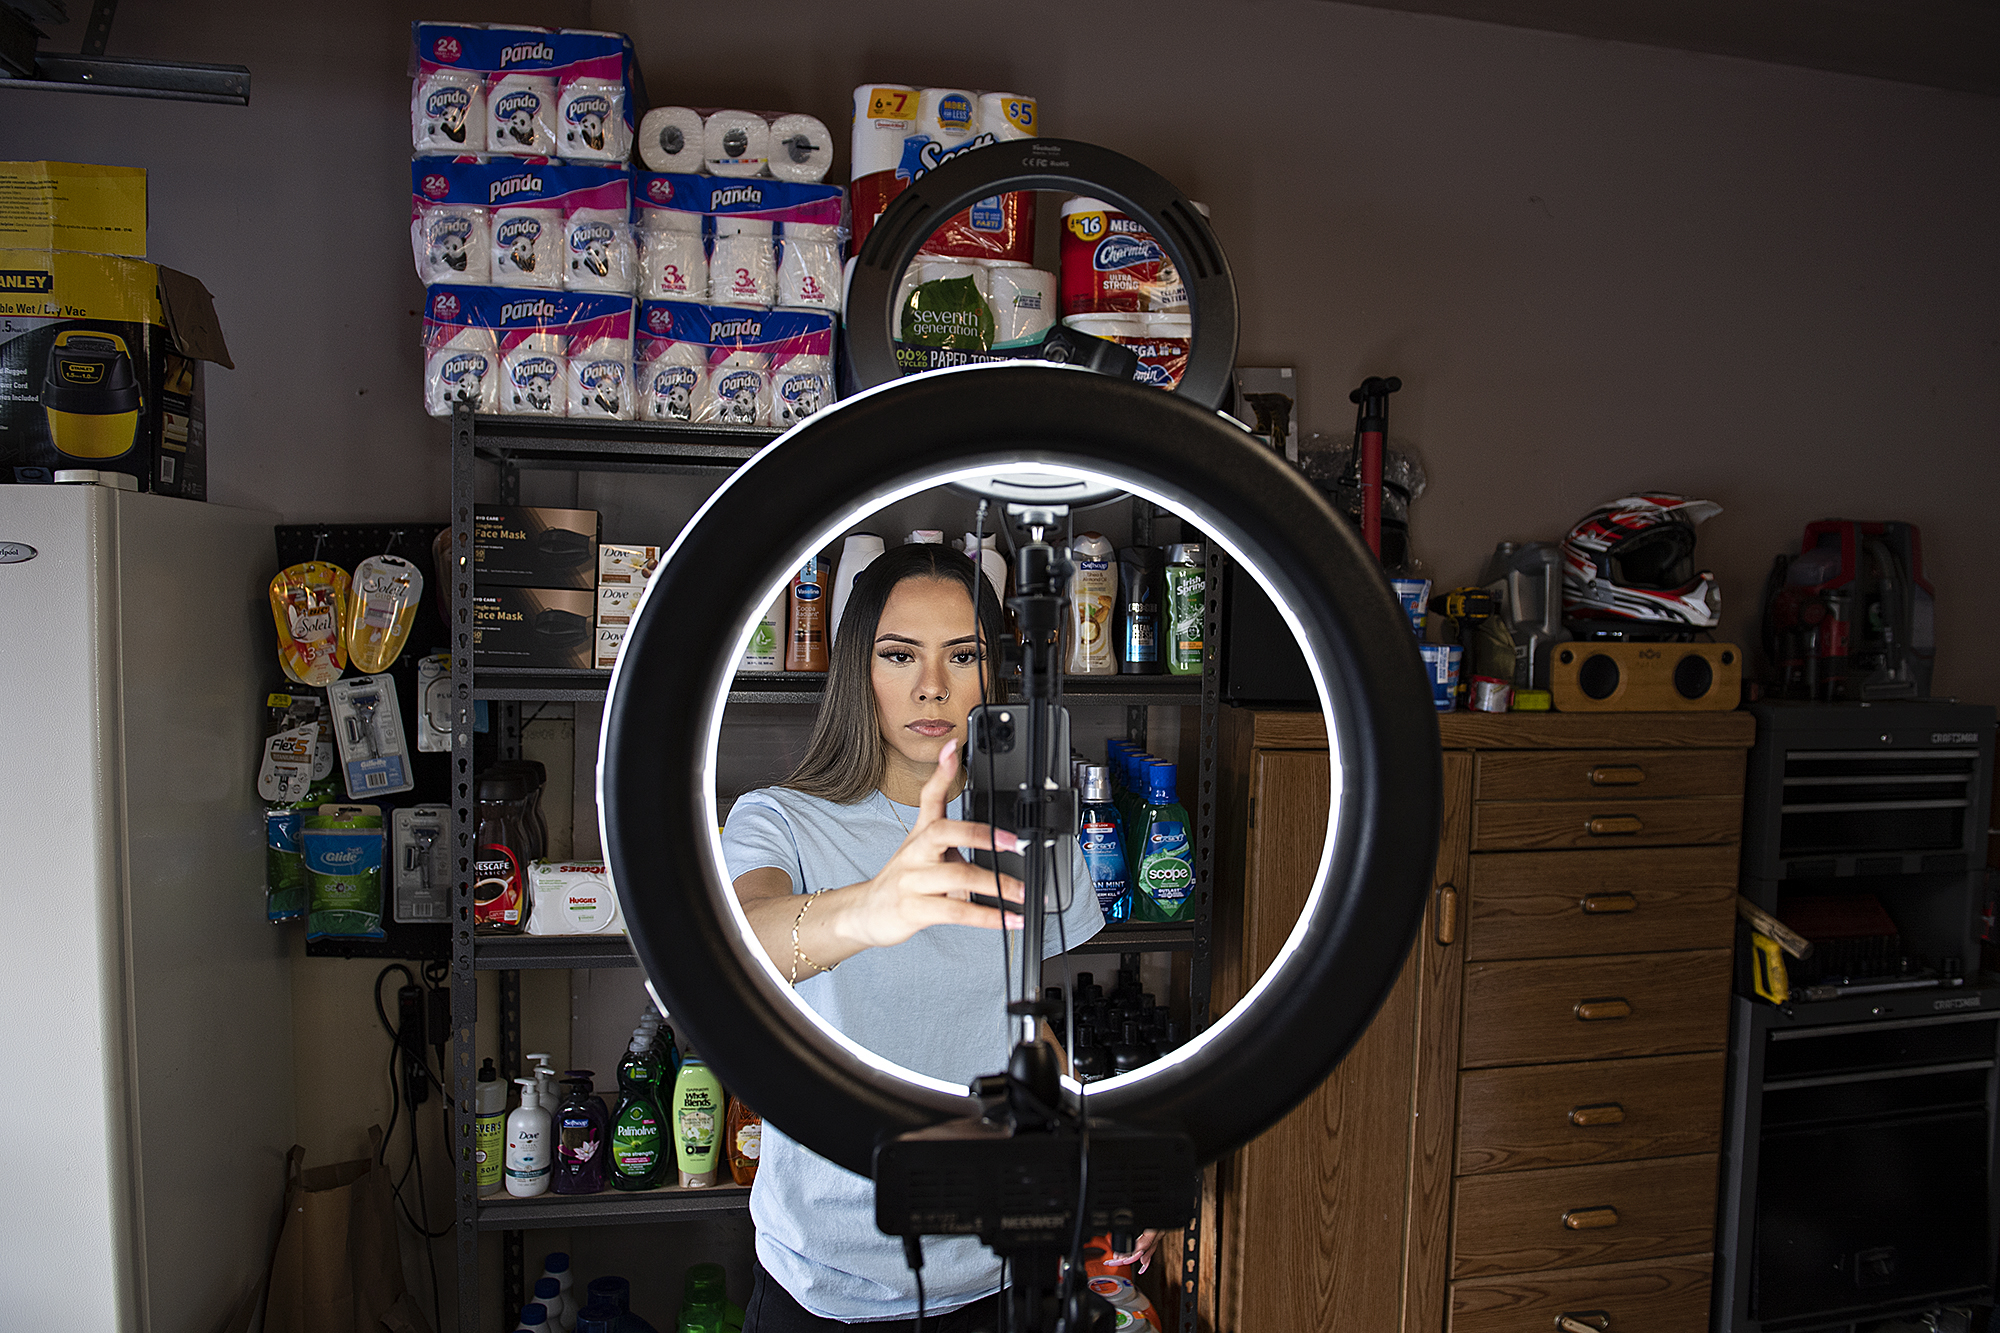 Social media influencer Jeimy Cruz, stands in front of a wall of products as she uses her smartphone to film a post for TikTok at her northeast Vancouver garage.